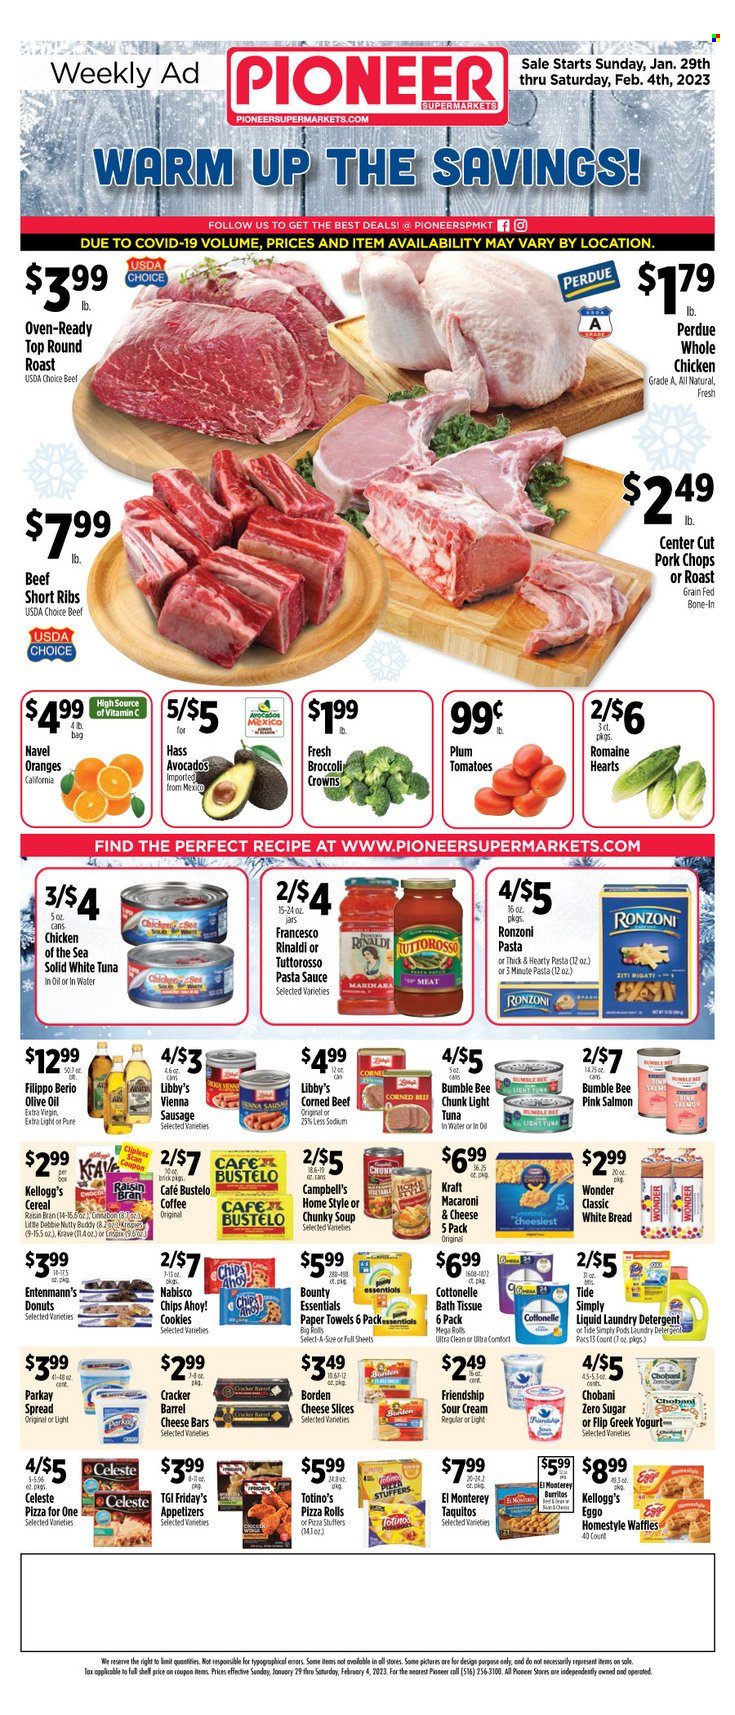 thumbnail - Pioneer Supermarkets Flyer - 01/29/2023 - 02/04/2023 - Sales products - bread, white bread, pizza rolls, donut, waffles, Entenmann's, avocado, oranges, salmon, tuna, Campbell's, macaroni & cheese, pizza, pasta sauce, soup, Bumble Bee, sauce, burrito, Perdue®, taquitos, Kraft®, corned beef, sliced cheese, greek yoghurt, yoghurt, Chobani, sour cream, Celeste, Bounty, crackers, Kellogg's, Chips Ahoy!, chips, tuna in water, light tuna, Chicken of the Sea, cereals, extra virgin olive oil, olive oil, whole chicken, beef meat, beef ribs, round roast, ribs, pork chops, pork meat, bath tissue, Cottonelle, kitchen towels, paper towels, detergent, Tide, laundry detergent, navel oranges. Page 1.